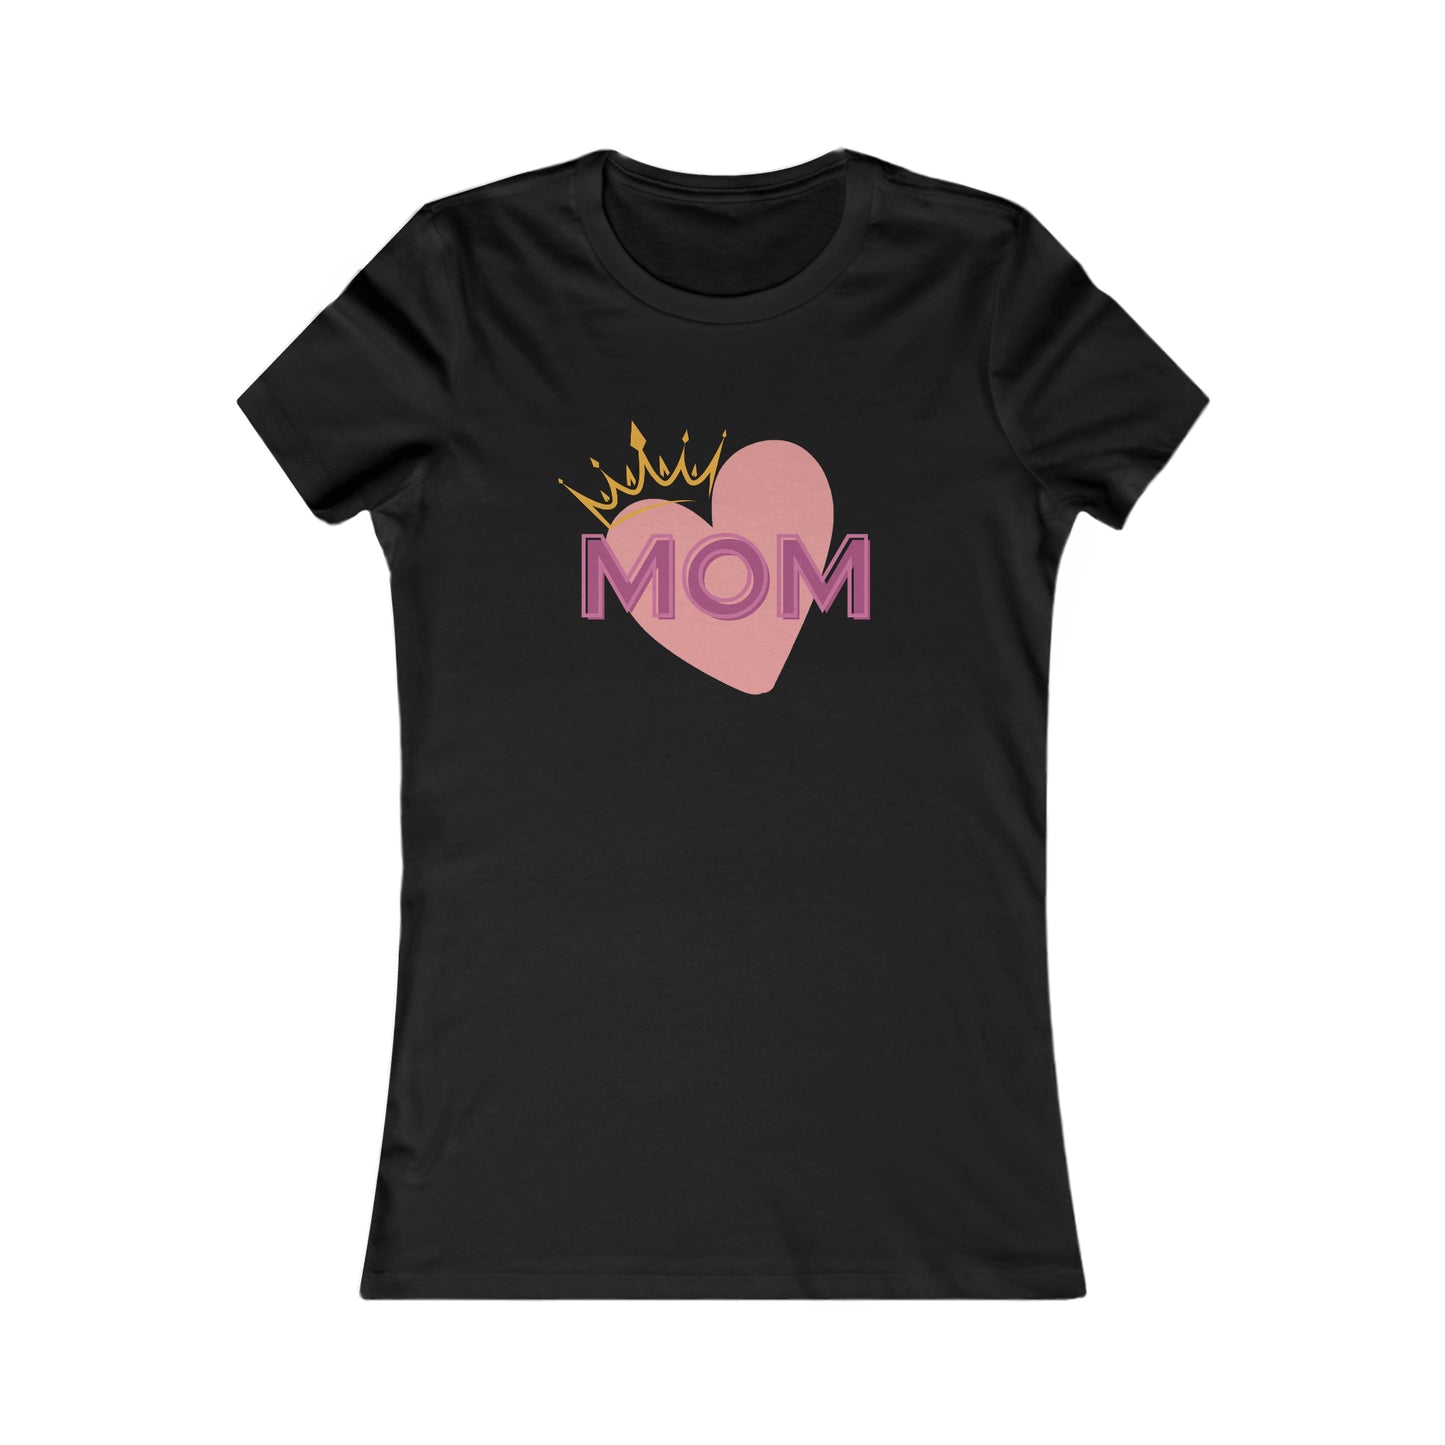 Mom with a Heart Women's Favorite Tee